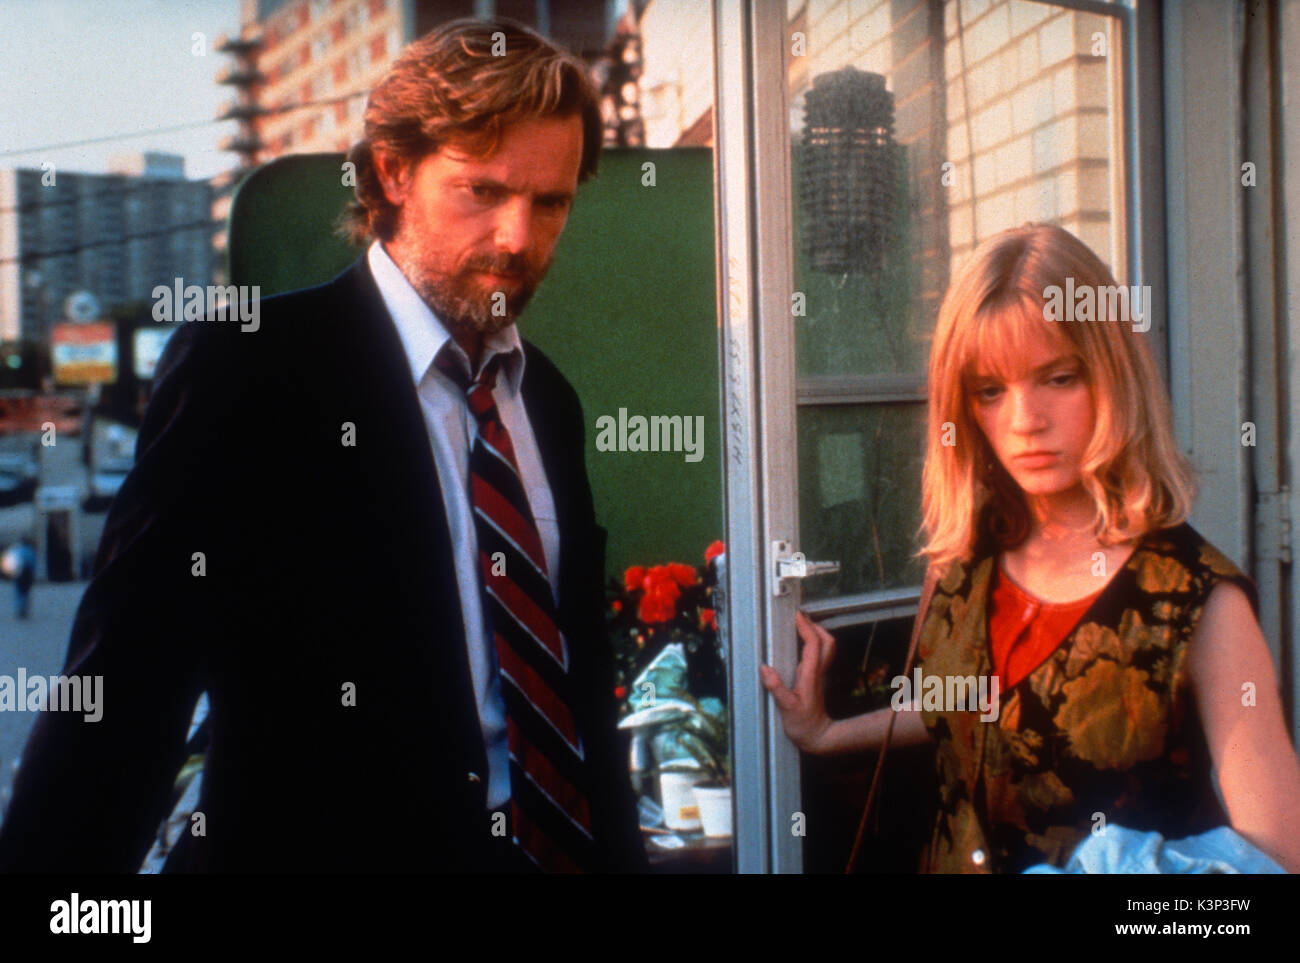 EXOTICA [CAN 1994] BRUCE GREENWOOD, SARAH POLLEY     Date: 1994 Stock Photo